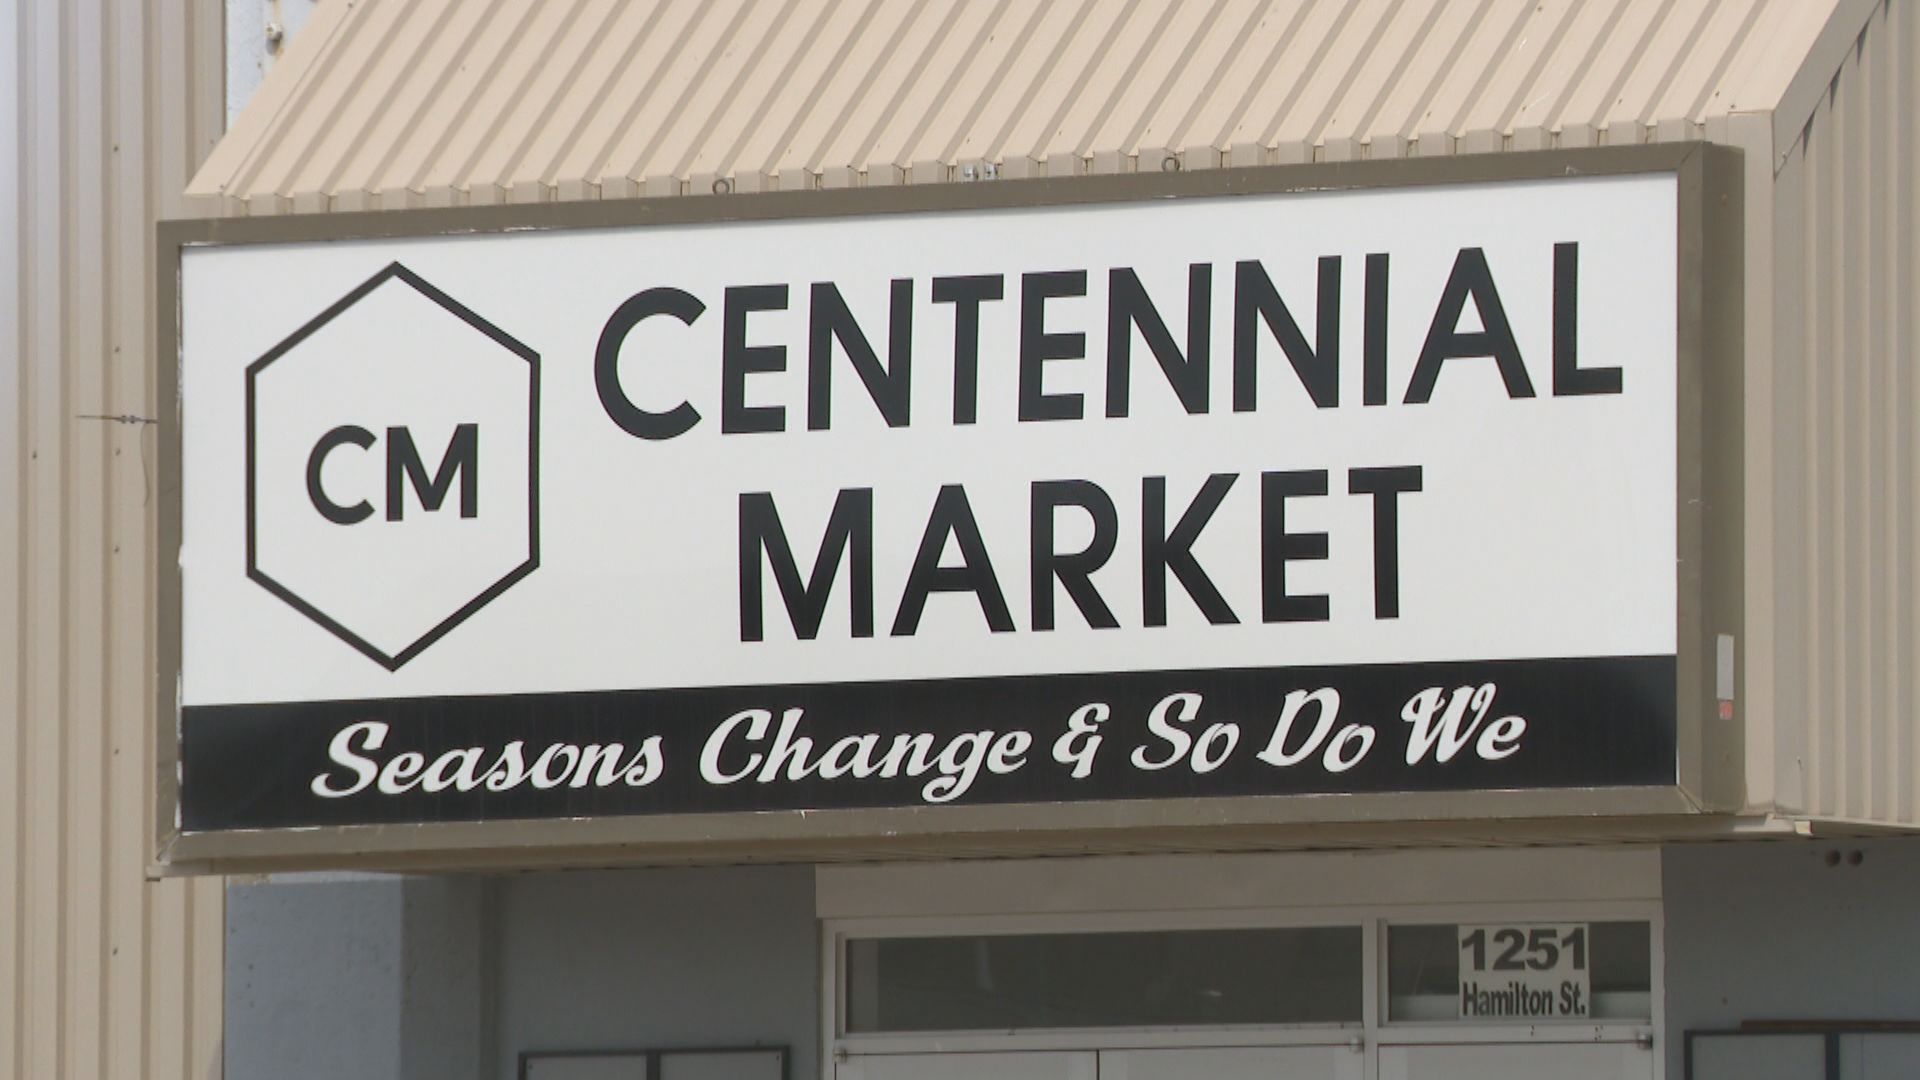 Regina small businesses find new homes after closure of Centennial Market